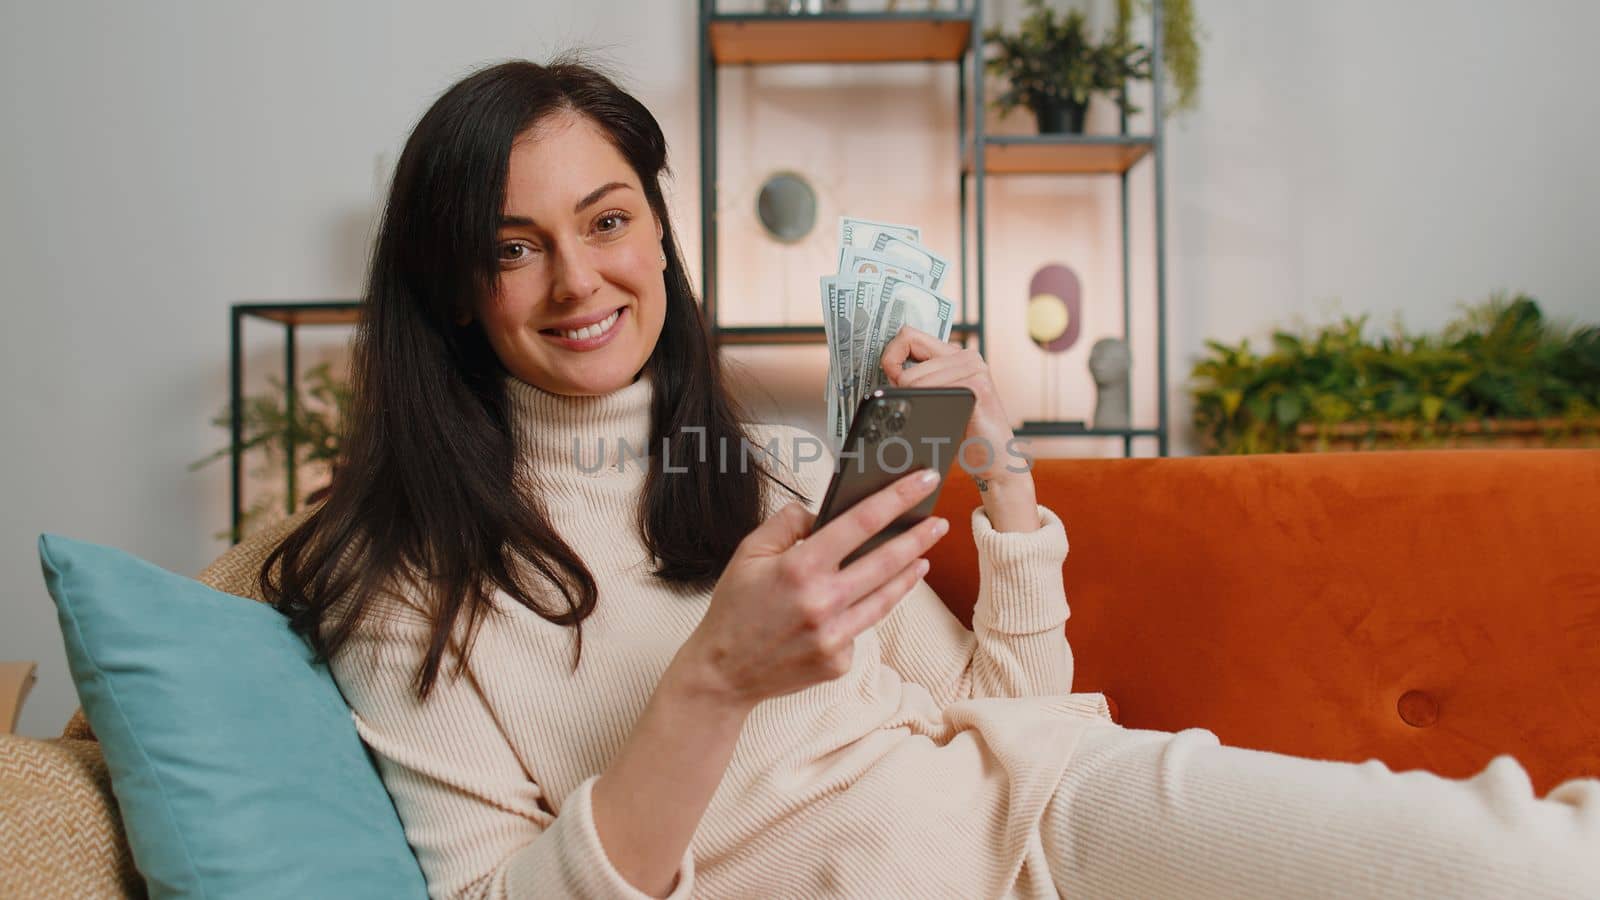 Planning family budget. Young happy brunette woman counting money dollar cash use smartphone calculate domestic bills at home. Joyful girl satisfied of income saves money for planned vacation gifts